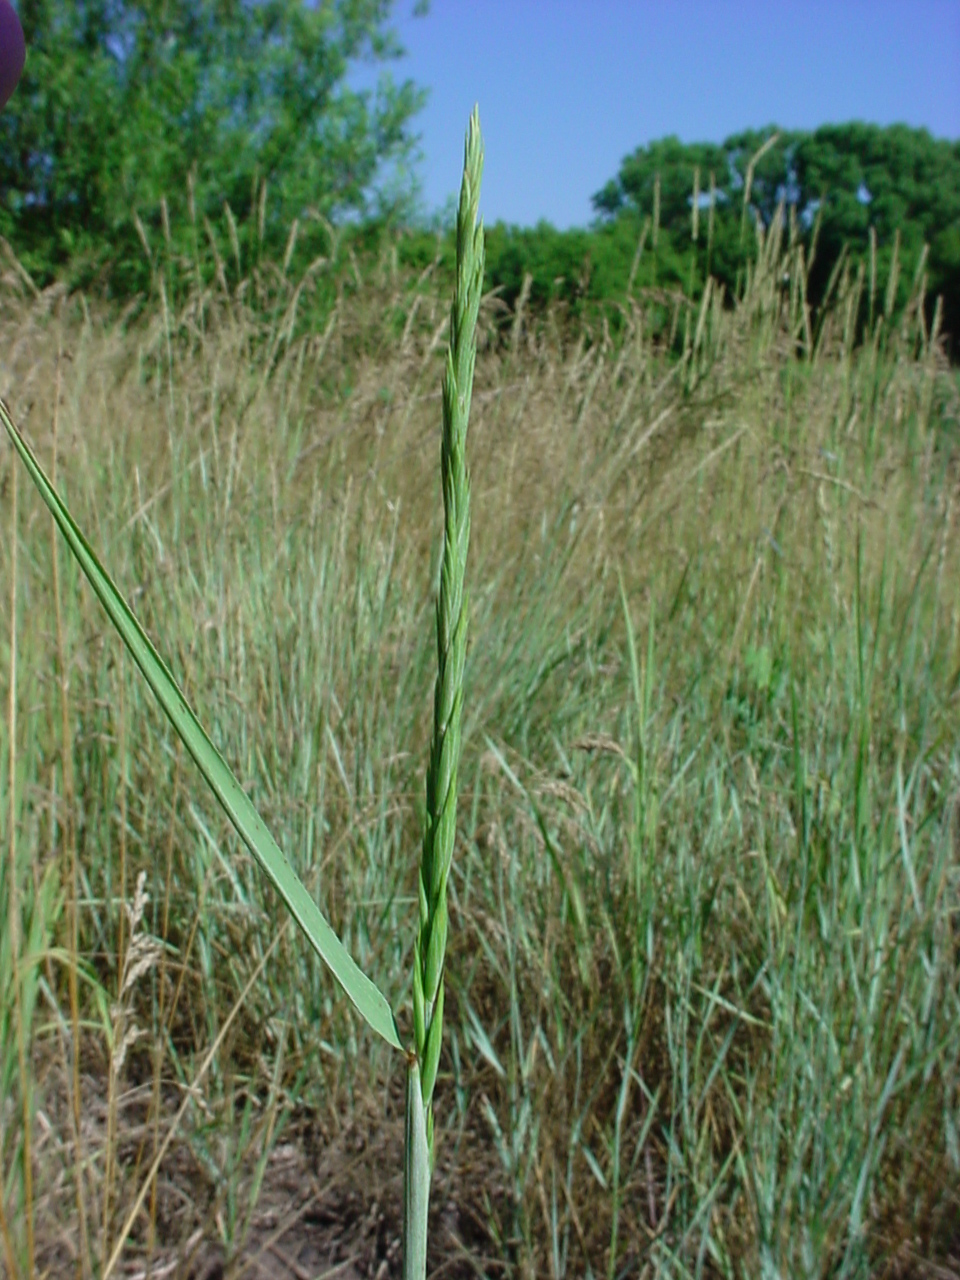 Green inflorescence, which is very narrow and long